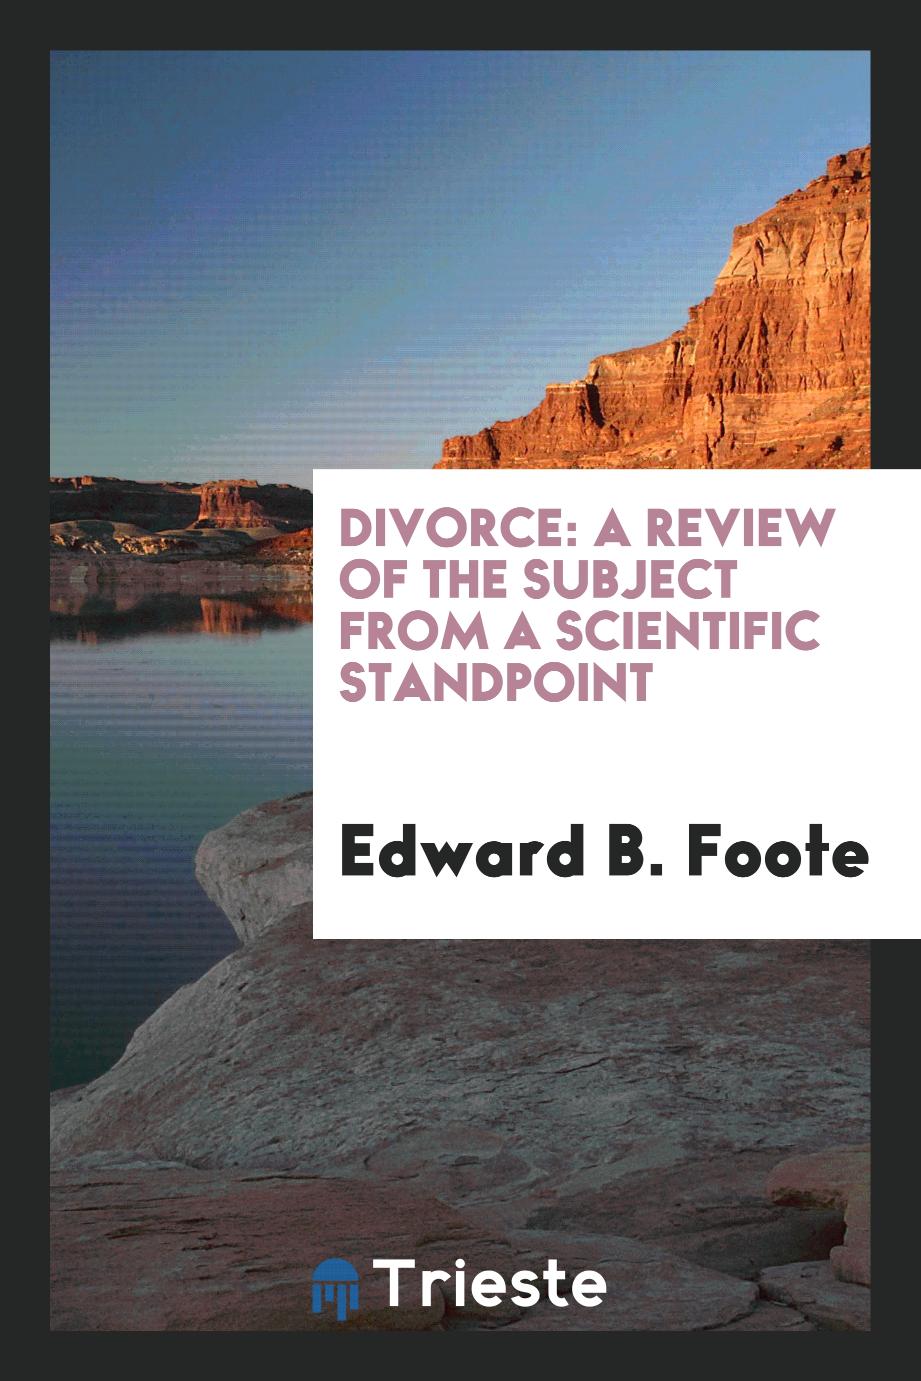 Divorce: A Review of the Subject from a Scientific Standpoint